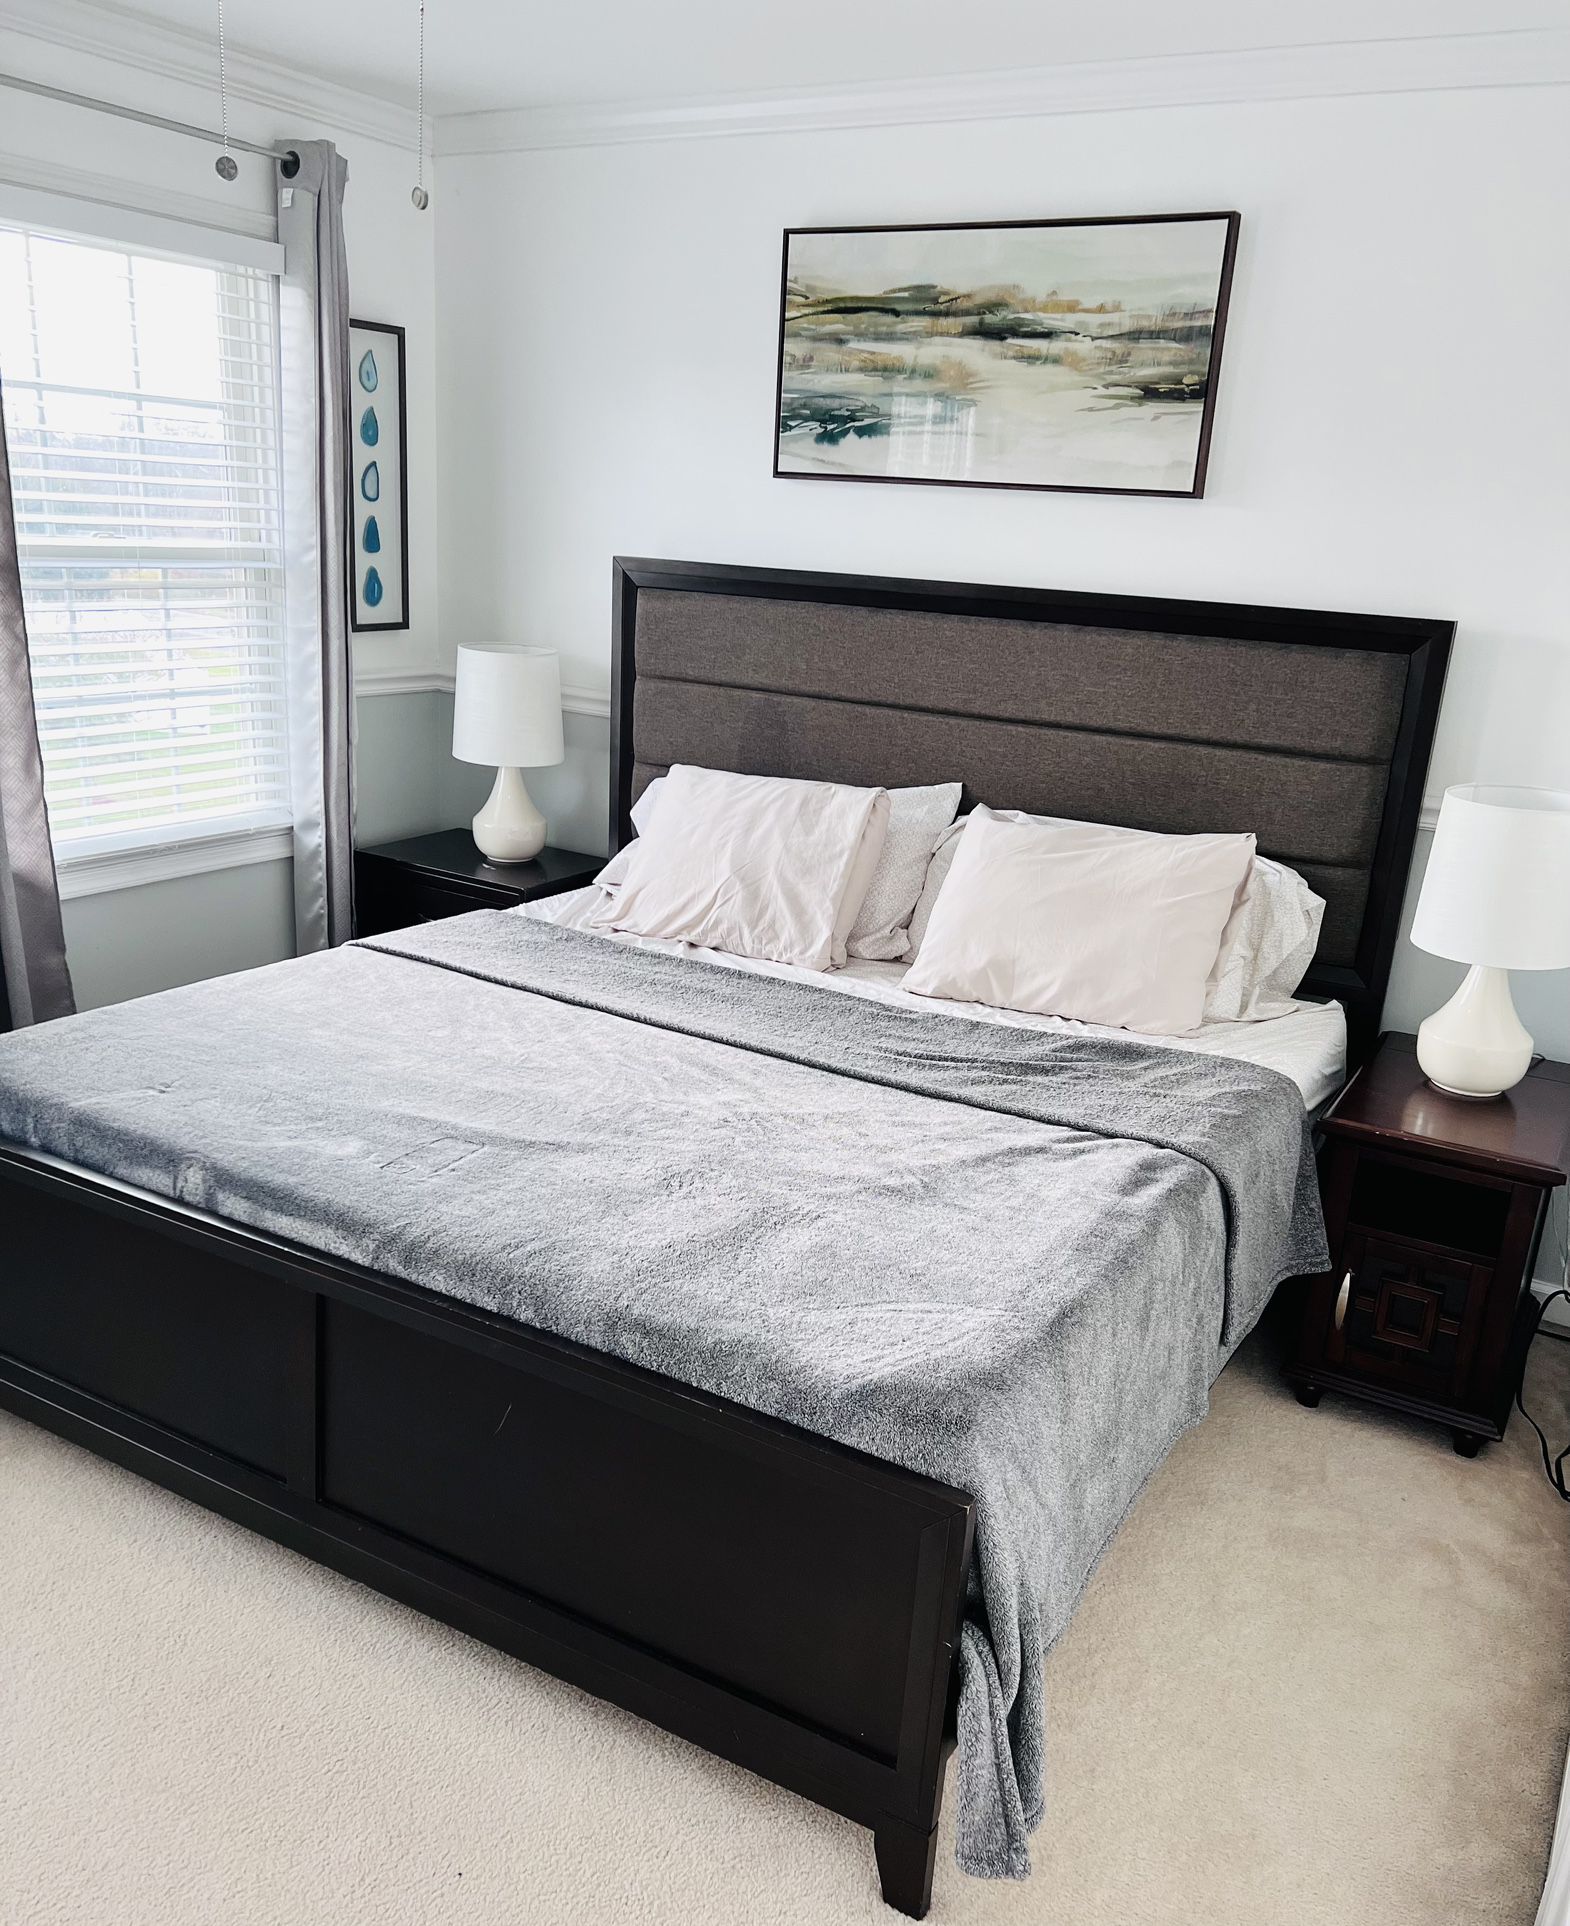 King Size Bed Set with 2 side tables & dresser with 6 drawers